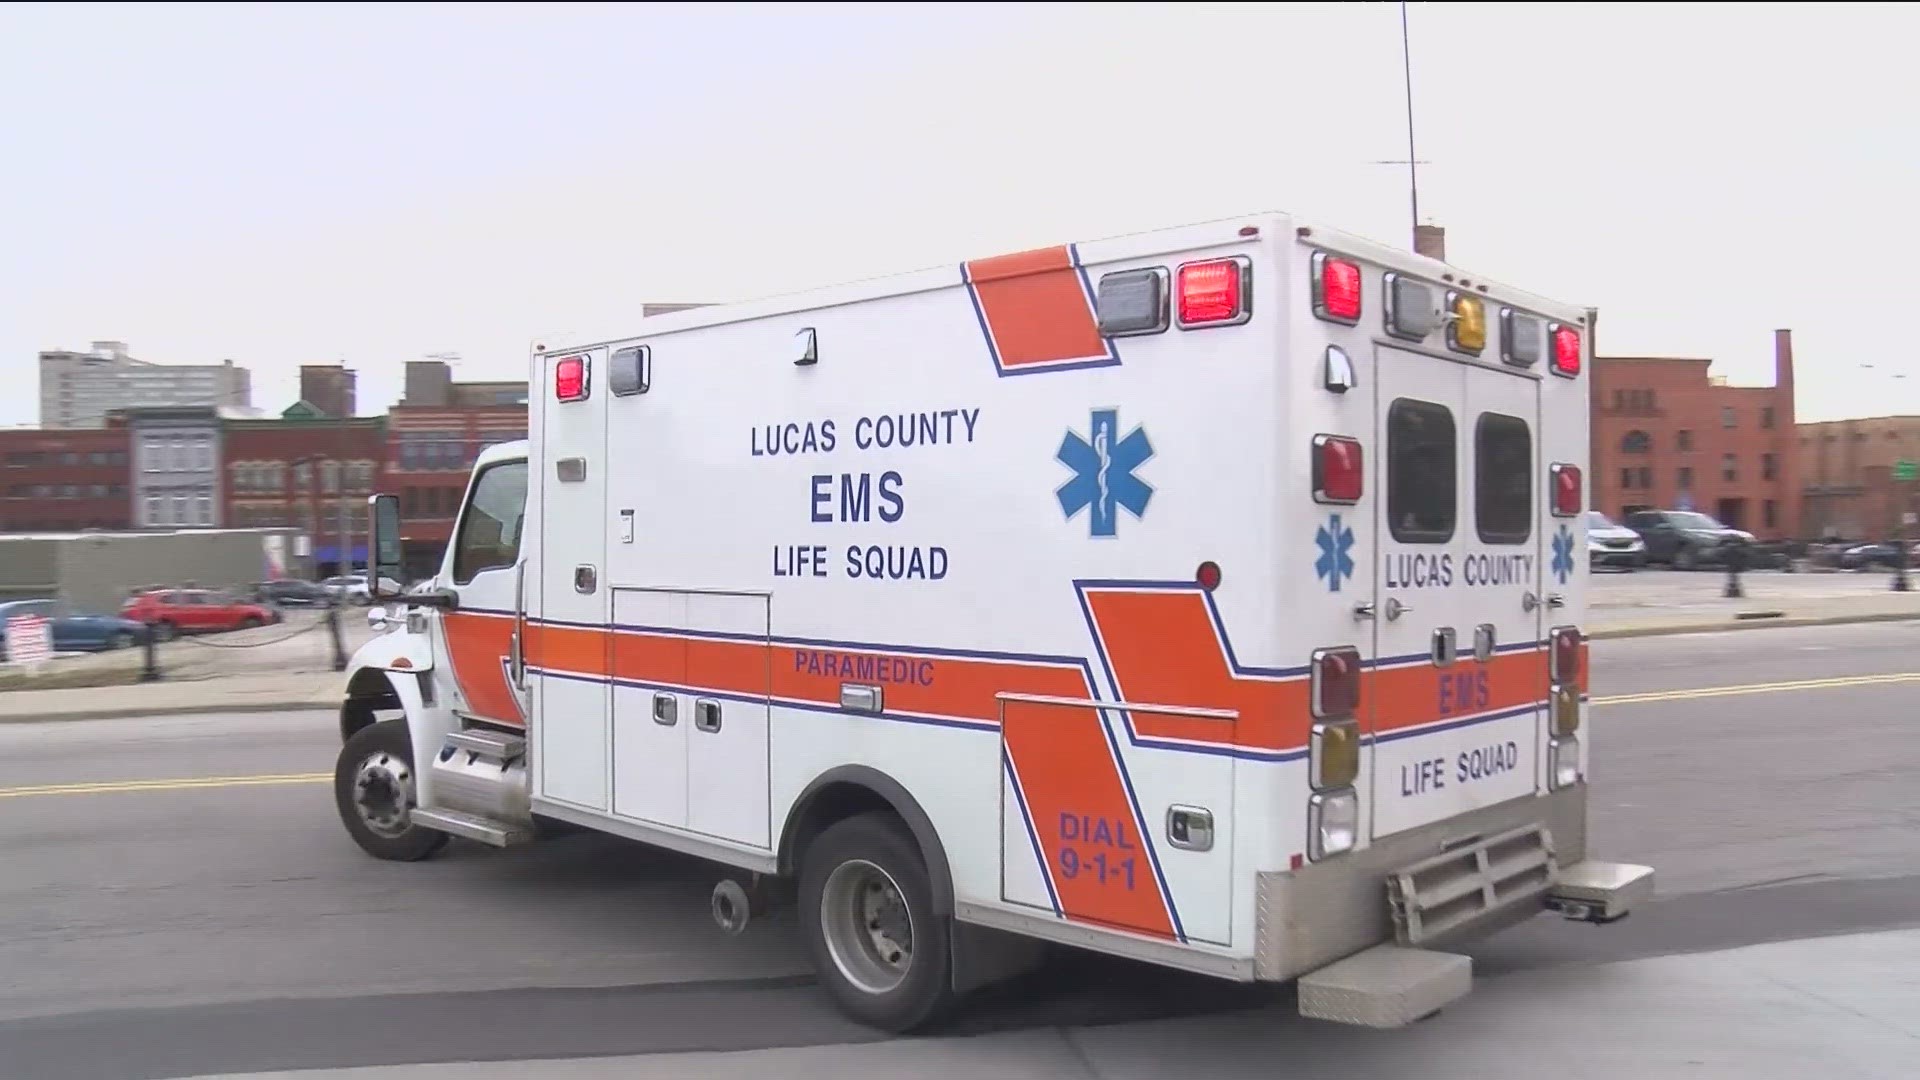 Earlier this month, the Lucas County Board of Commissioners approved a proposal that would move ownership of Life Squad services to each municipality.